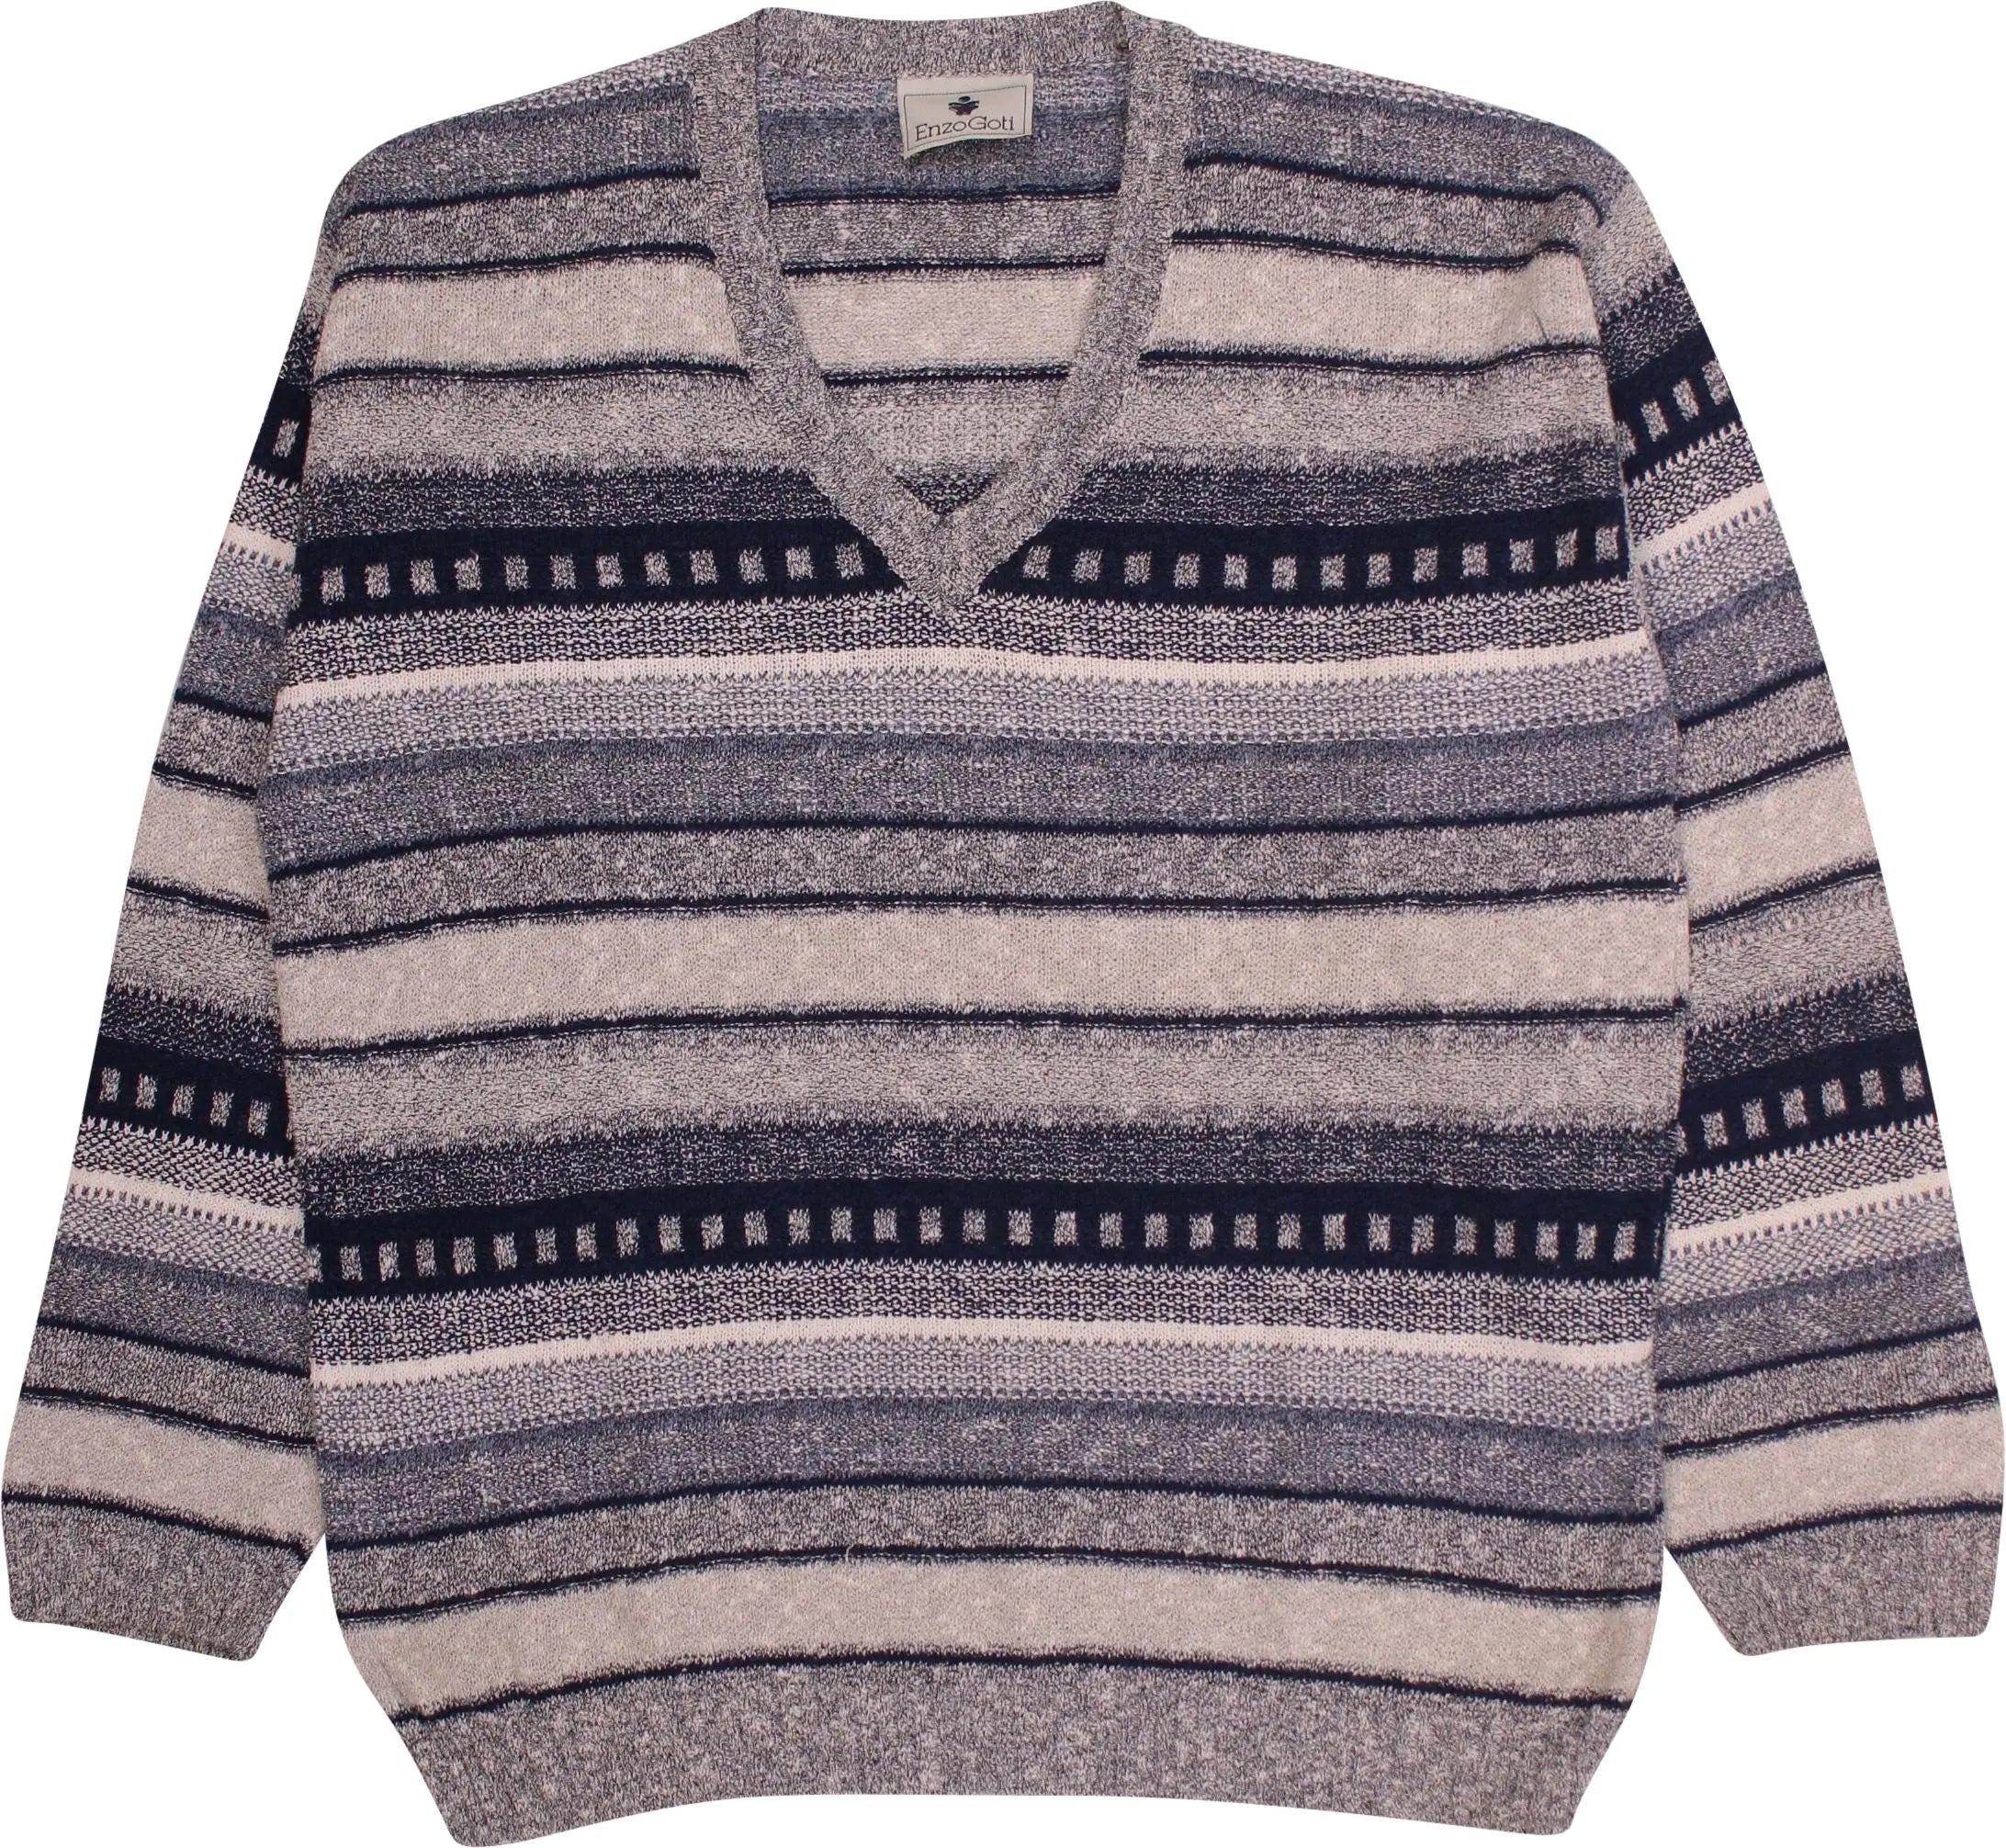 Enzo Goti - 90s Knitted Sweater by Enzo Goti- ThriftTale.com - Vintage and second handclothing